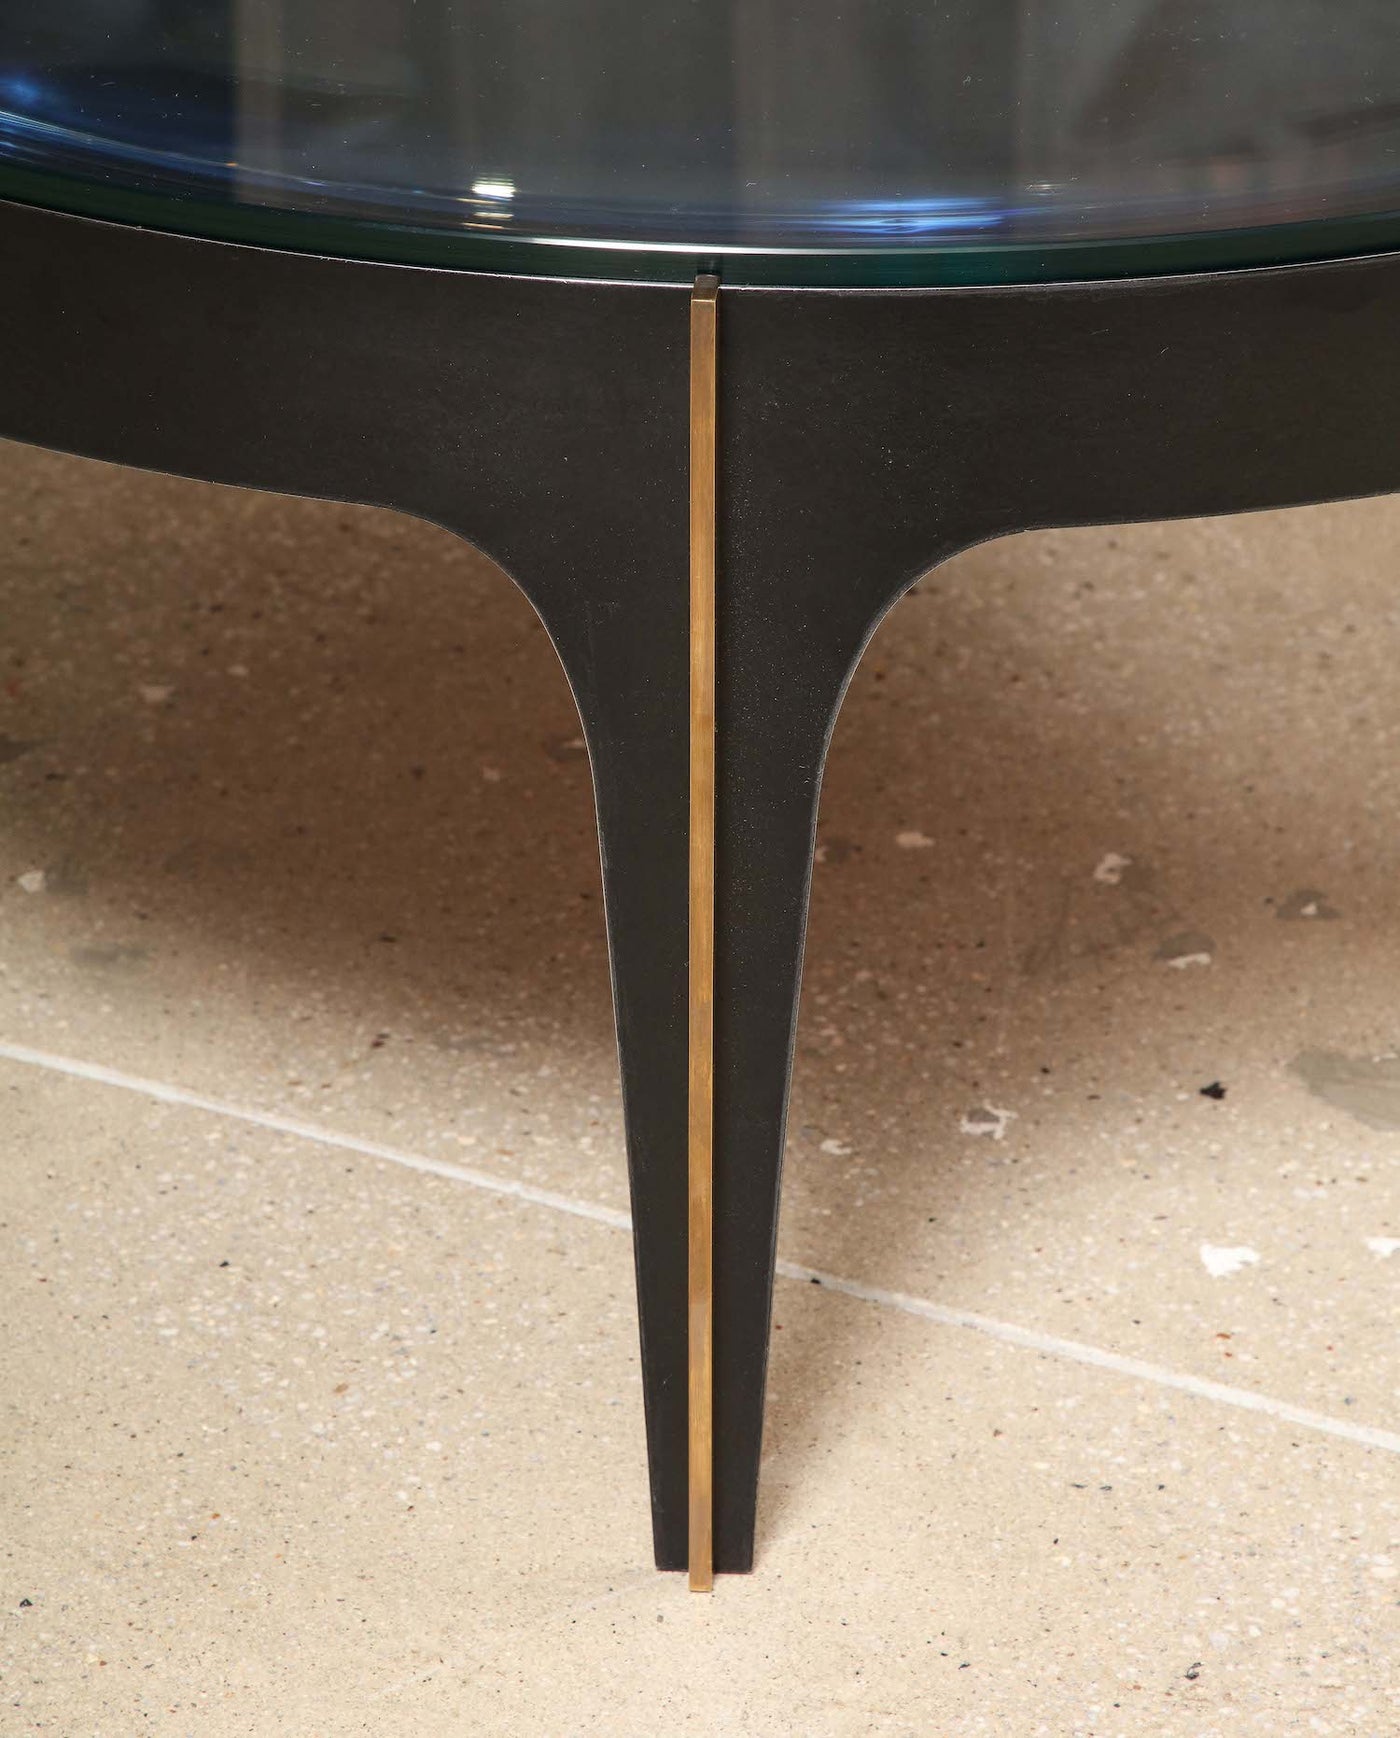 Model 1744, Circular Cocktail Table by Max Ingrand for Fontana Arte